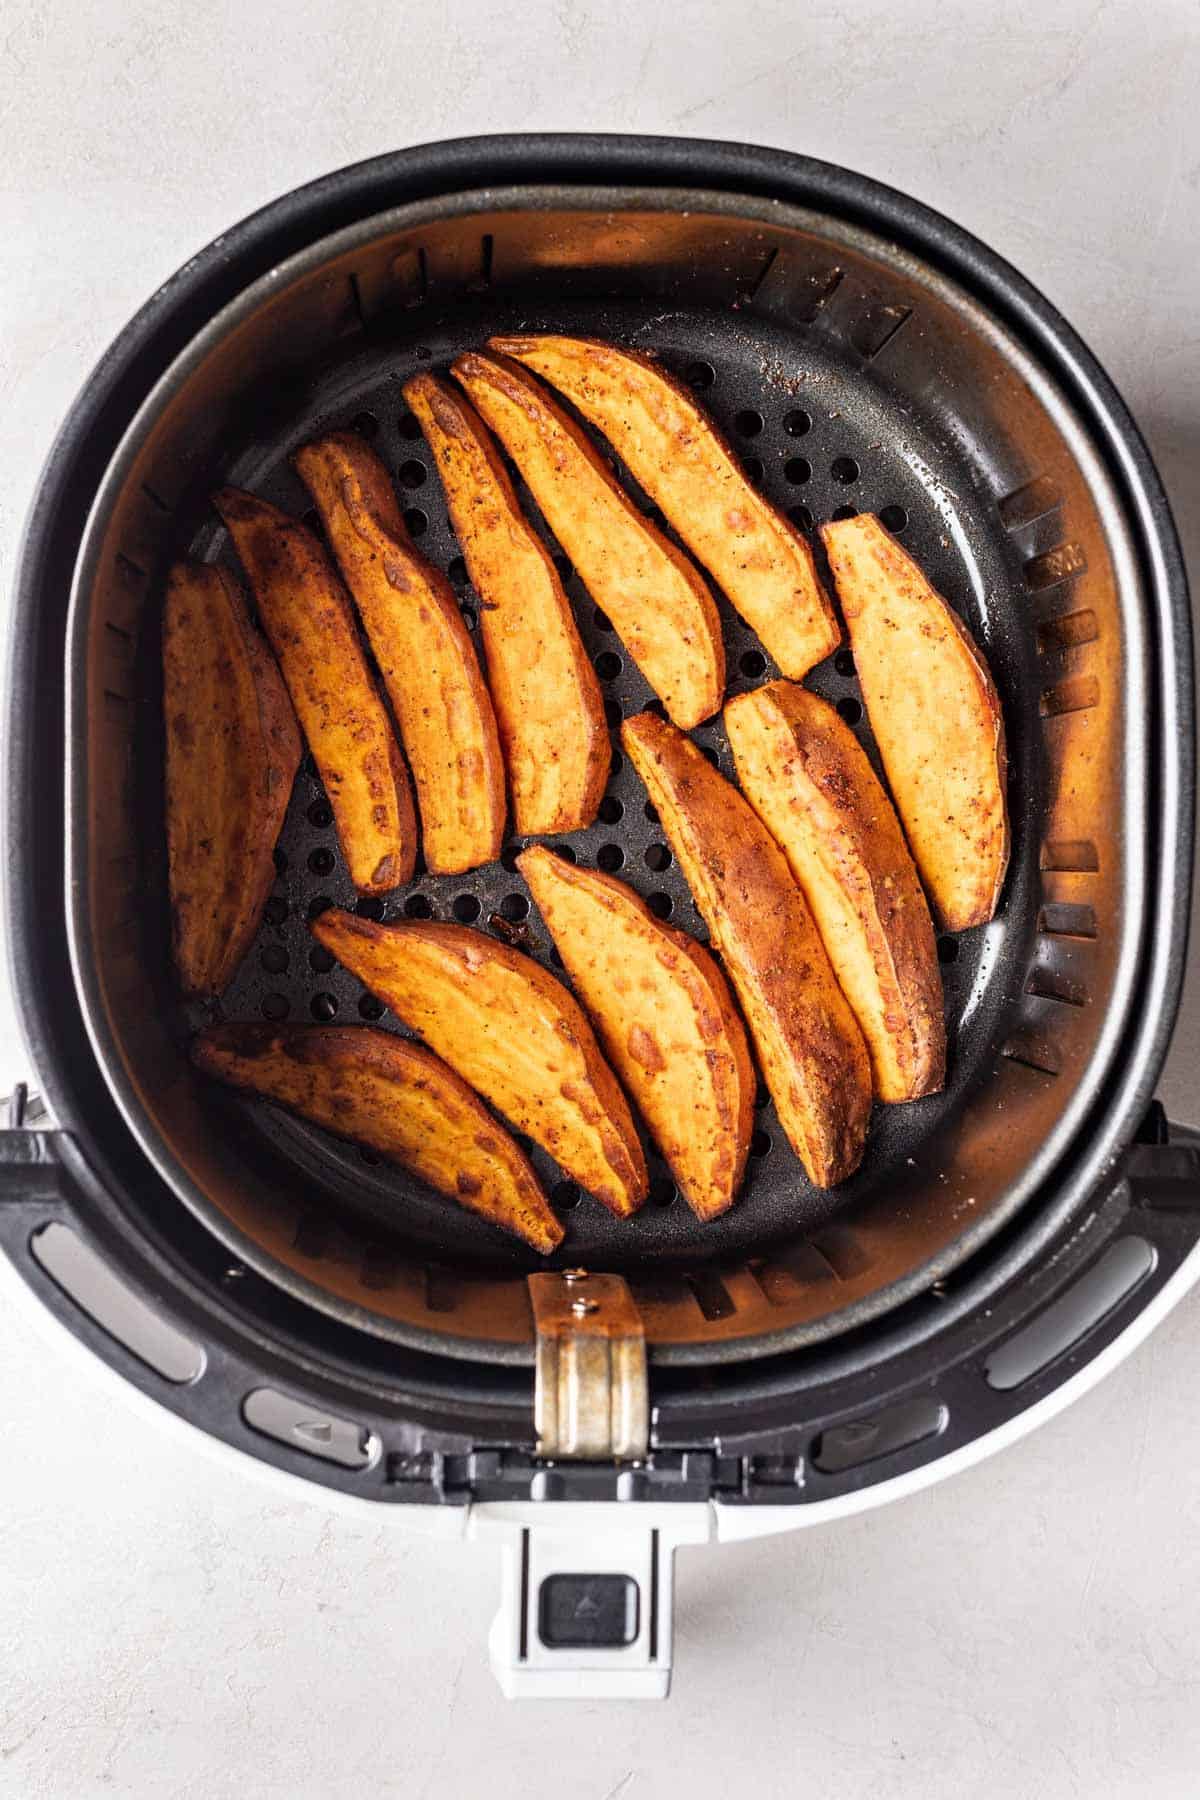 Cooked sweet potatoes in the air fryer.